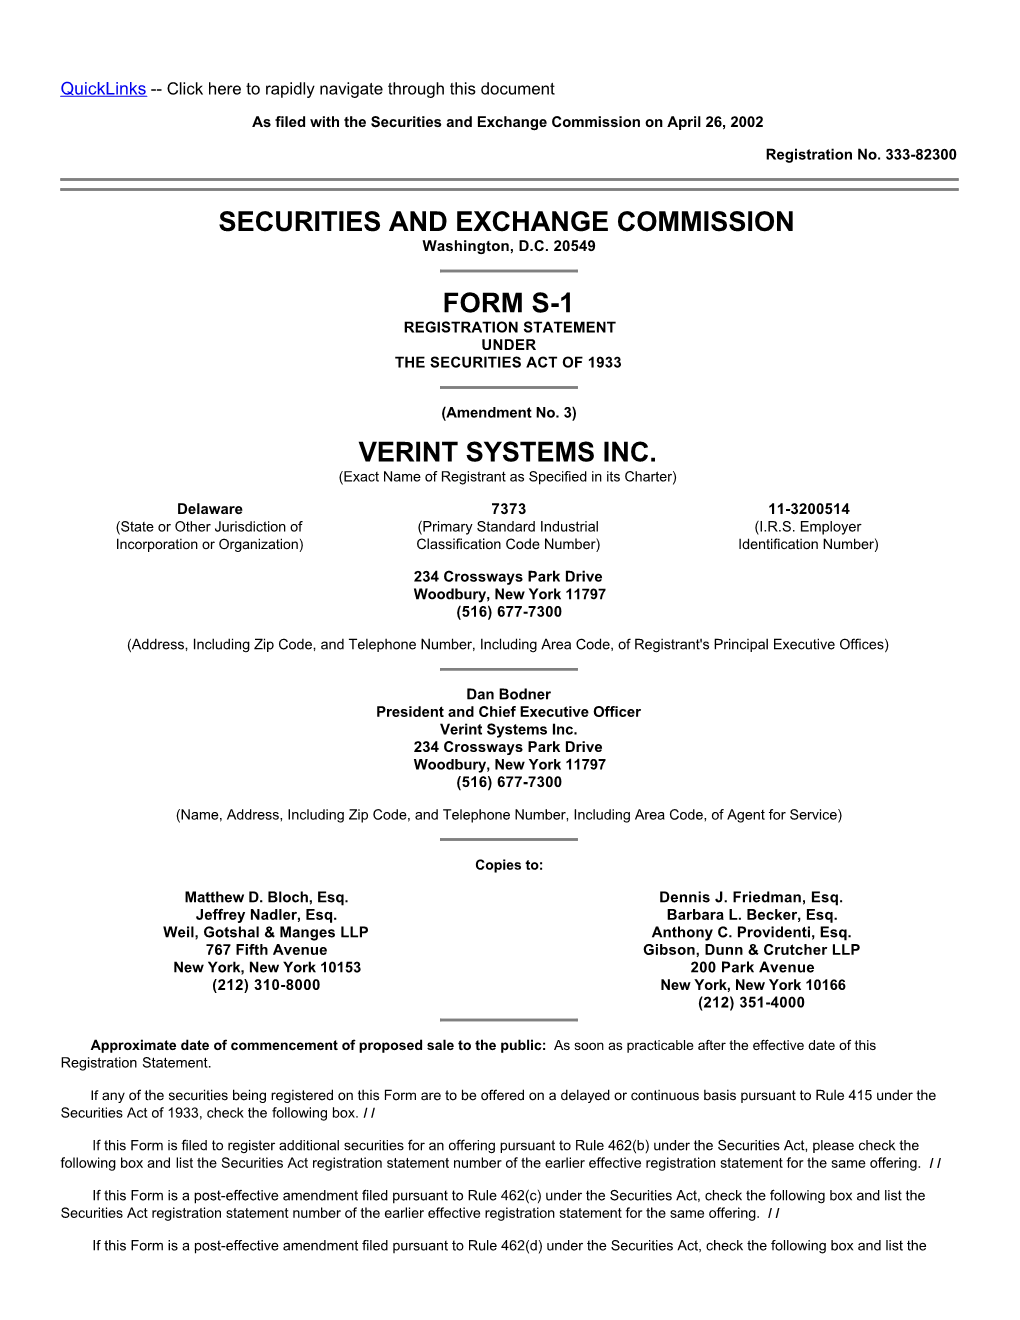 Securities and Exchange Commission Form S-1 Verint